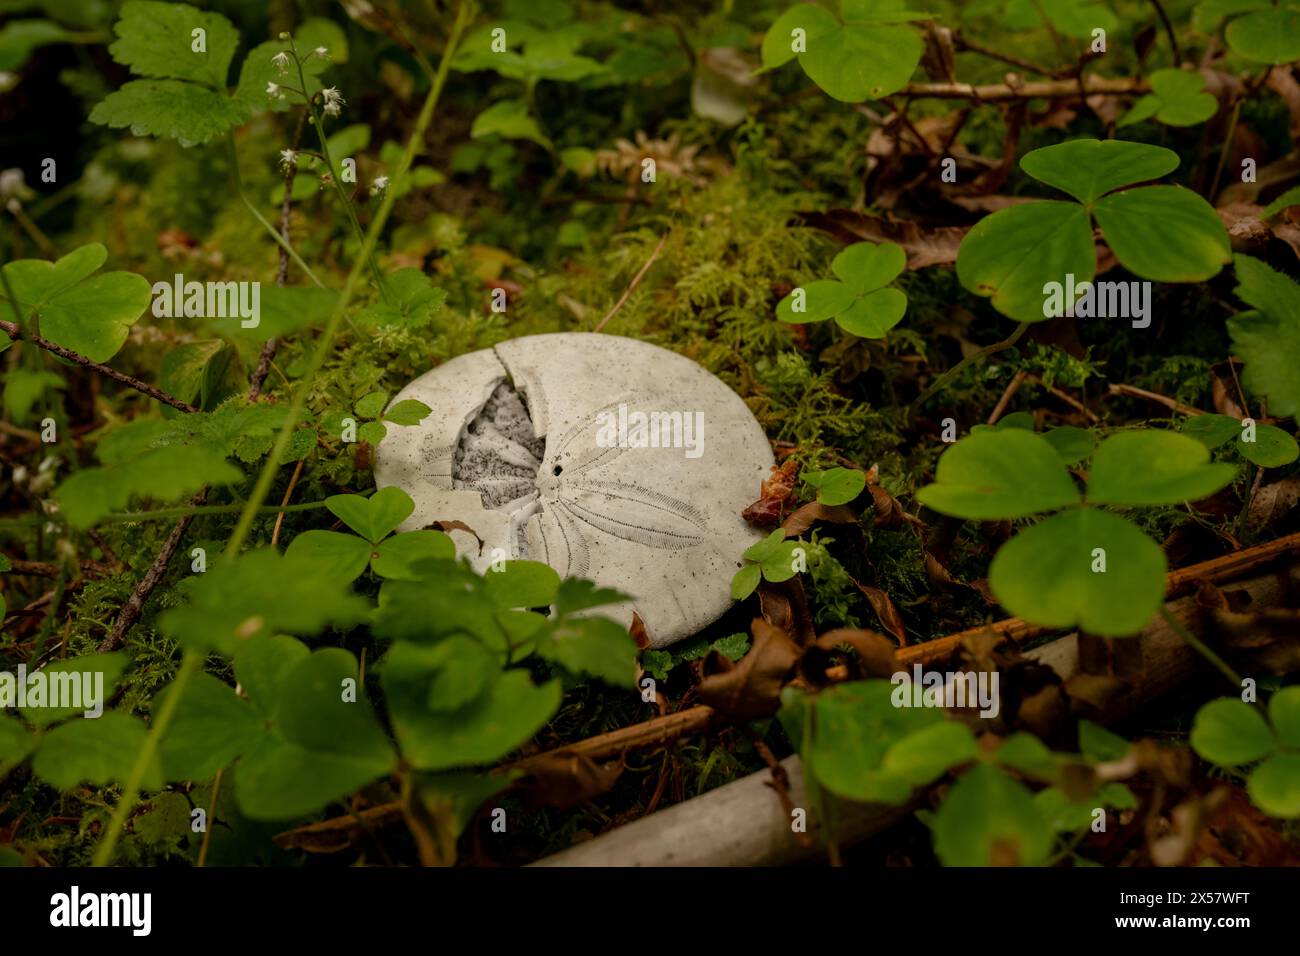 Misplaced Sand Dollar Sits on Moss in Olympic Forest near the Hoh Stock Photo